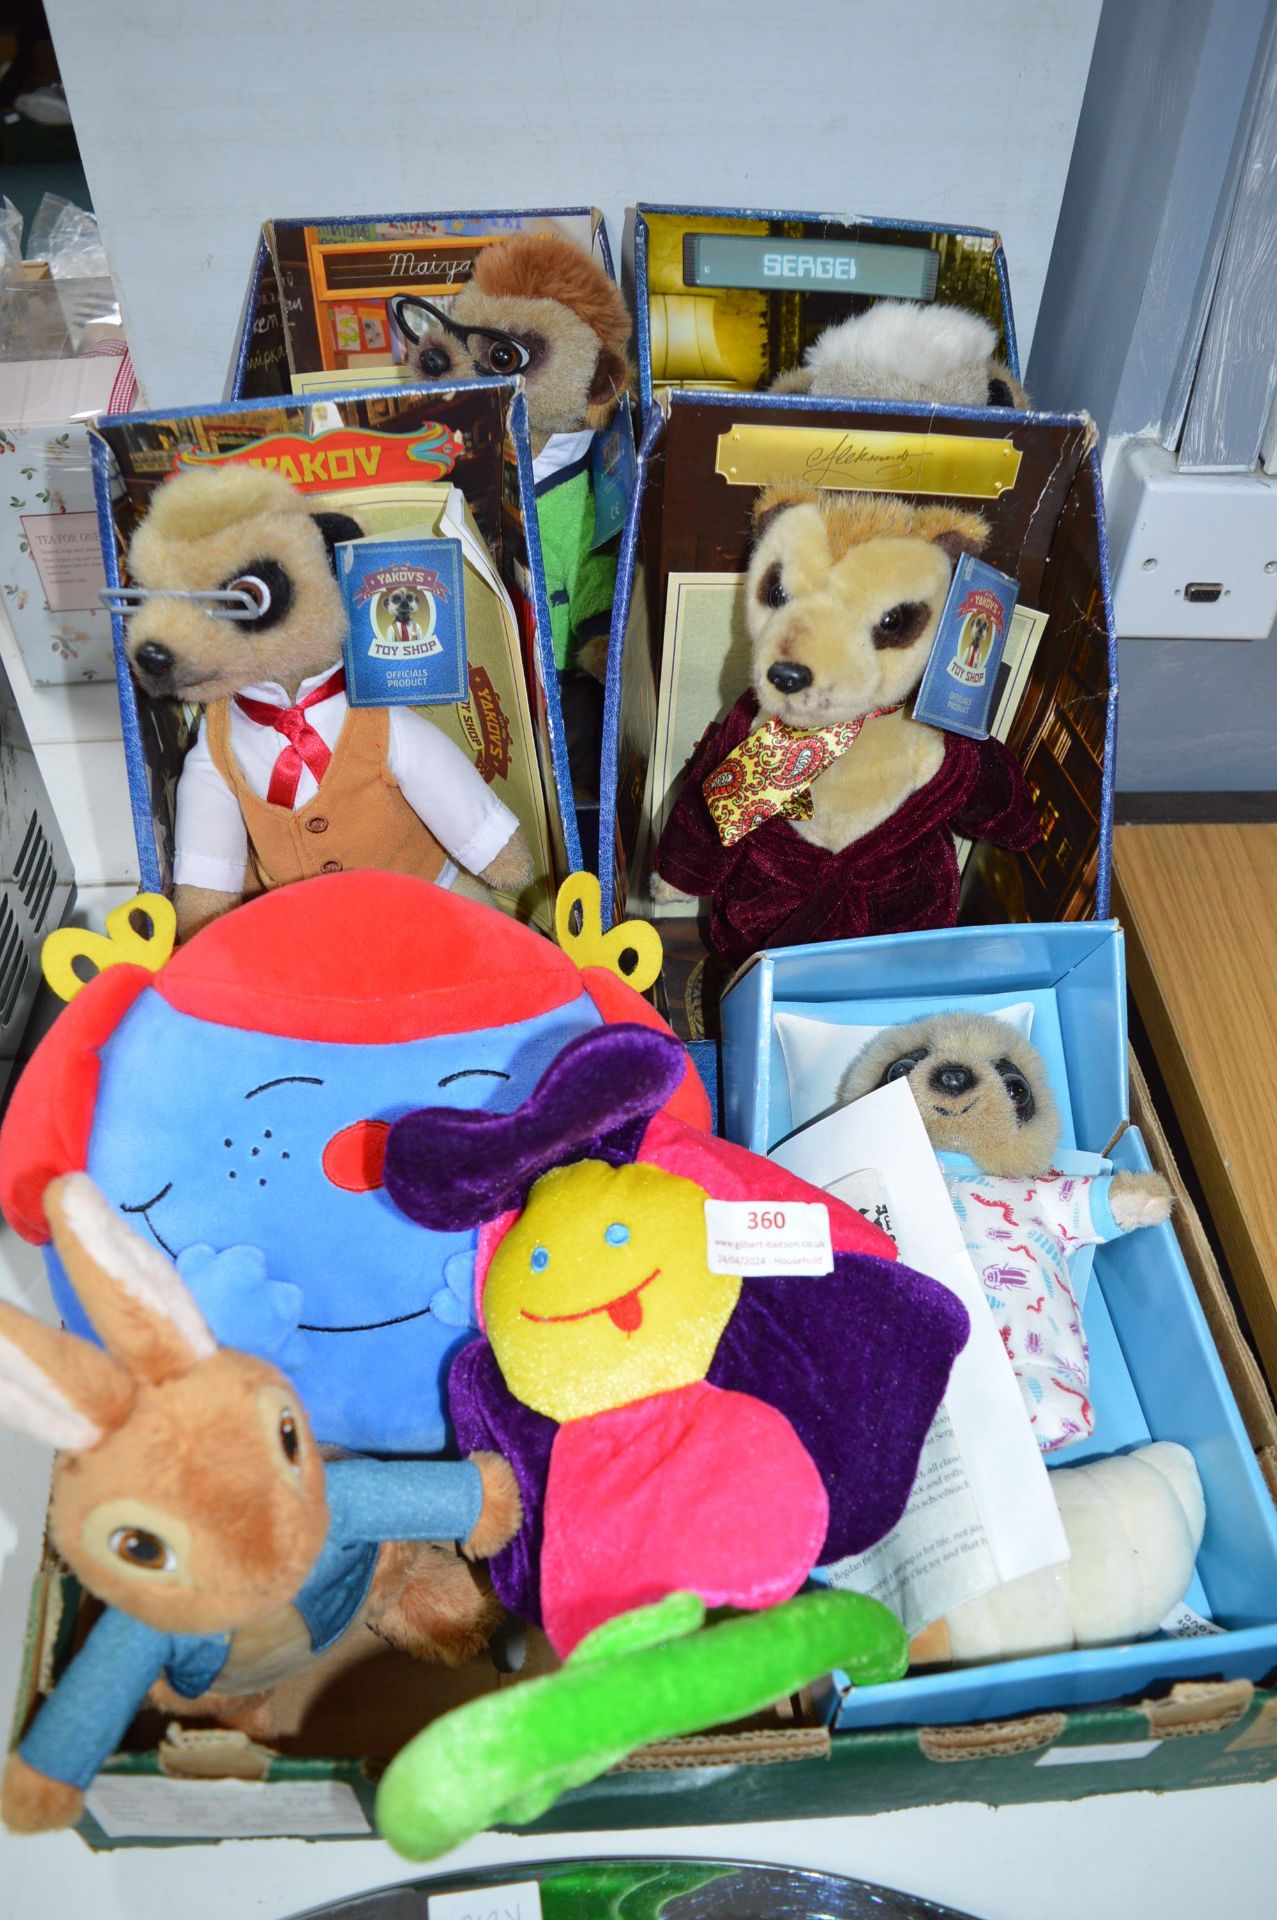 Meerkats and Other Soft Toys